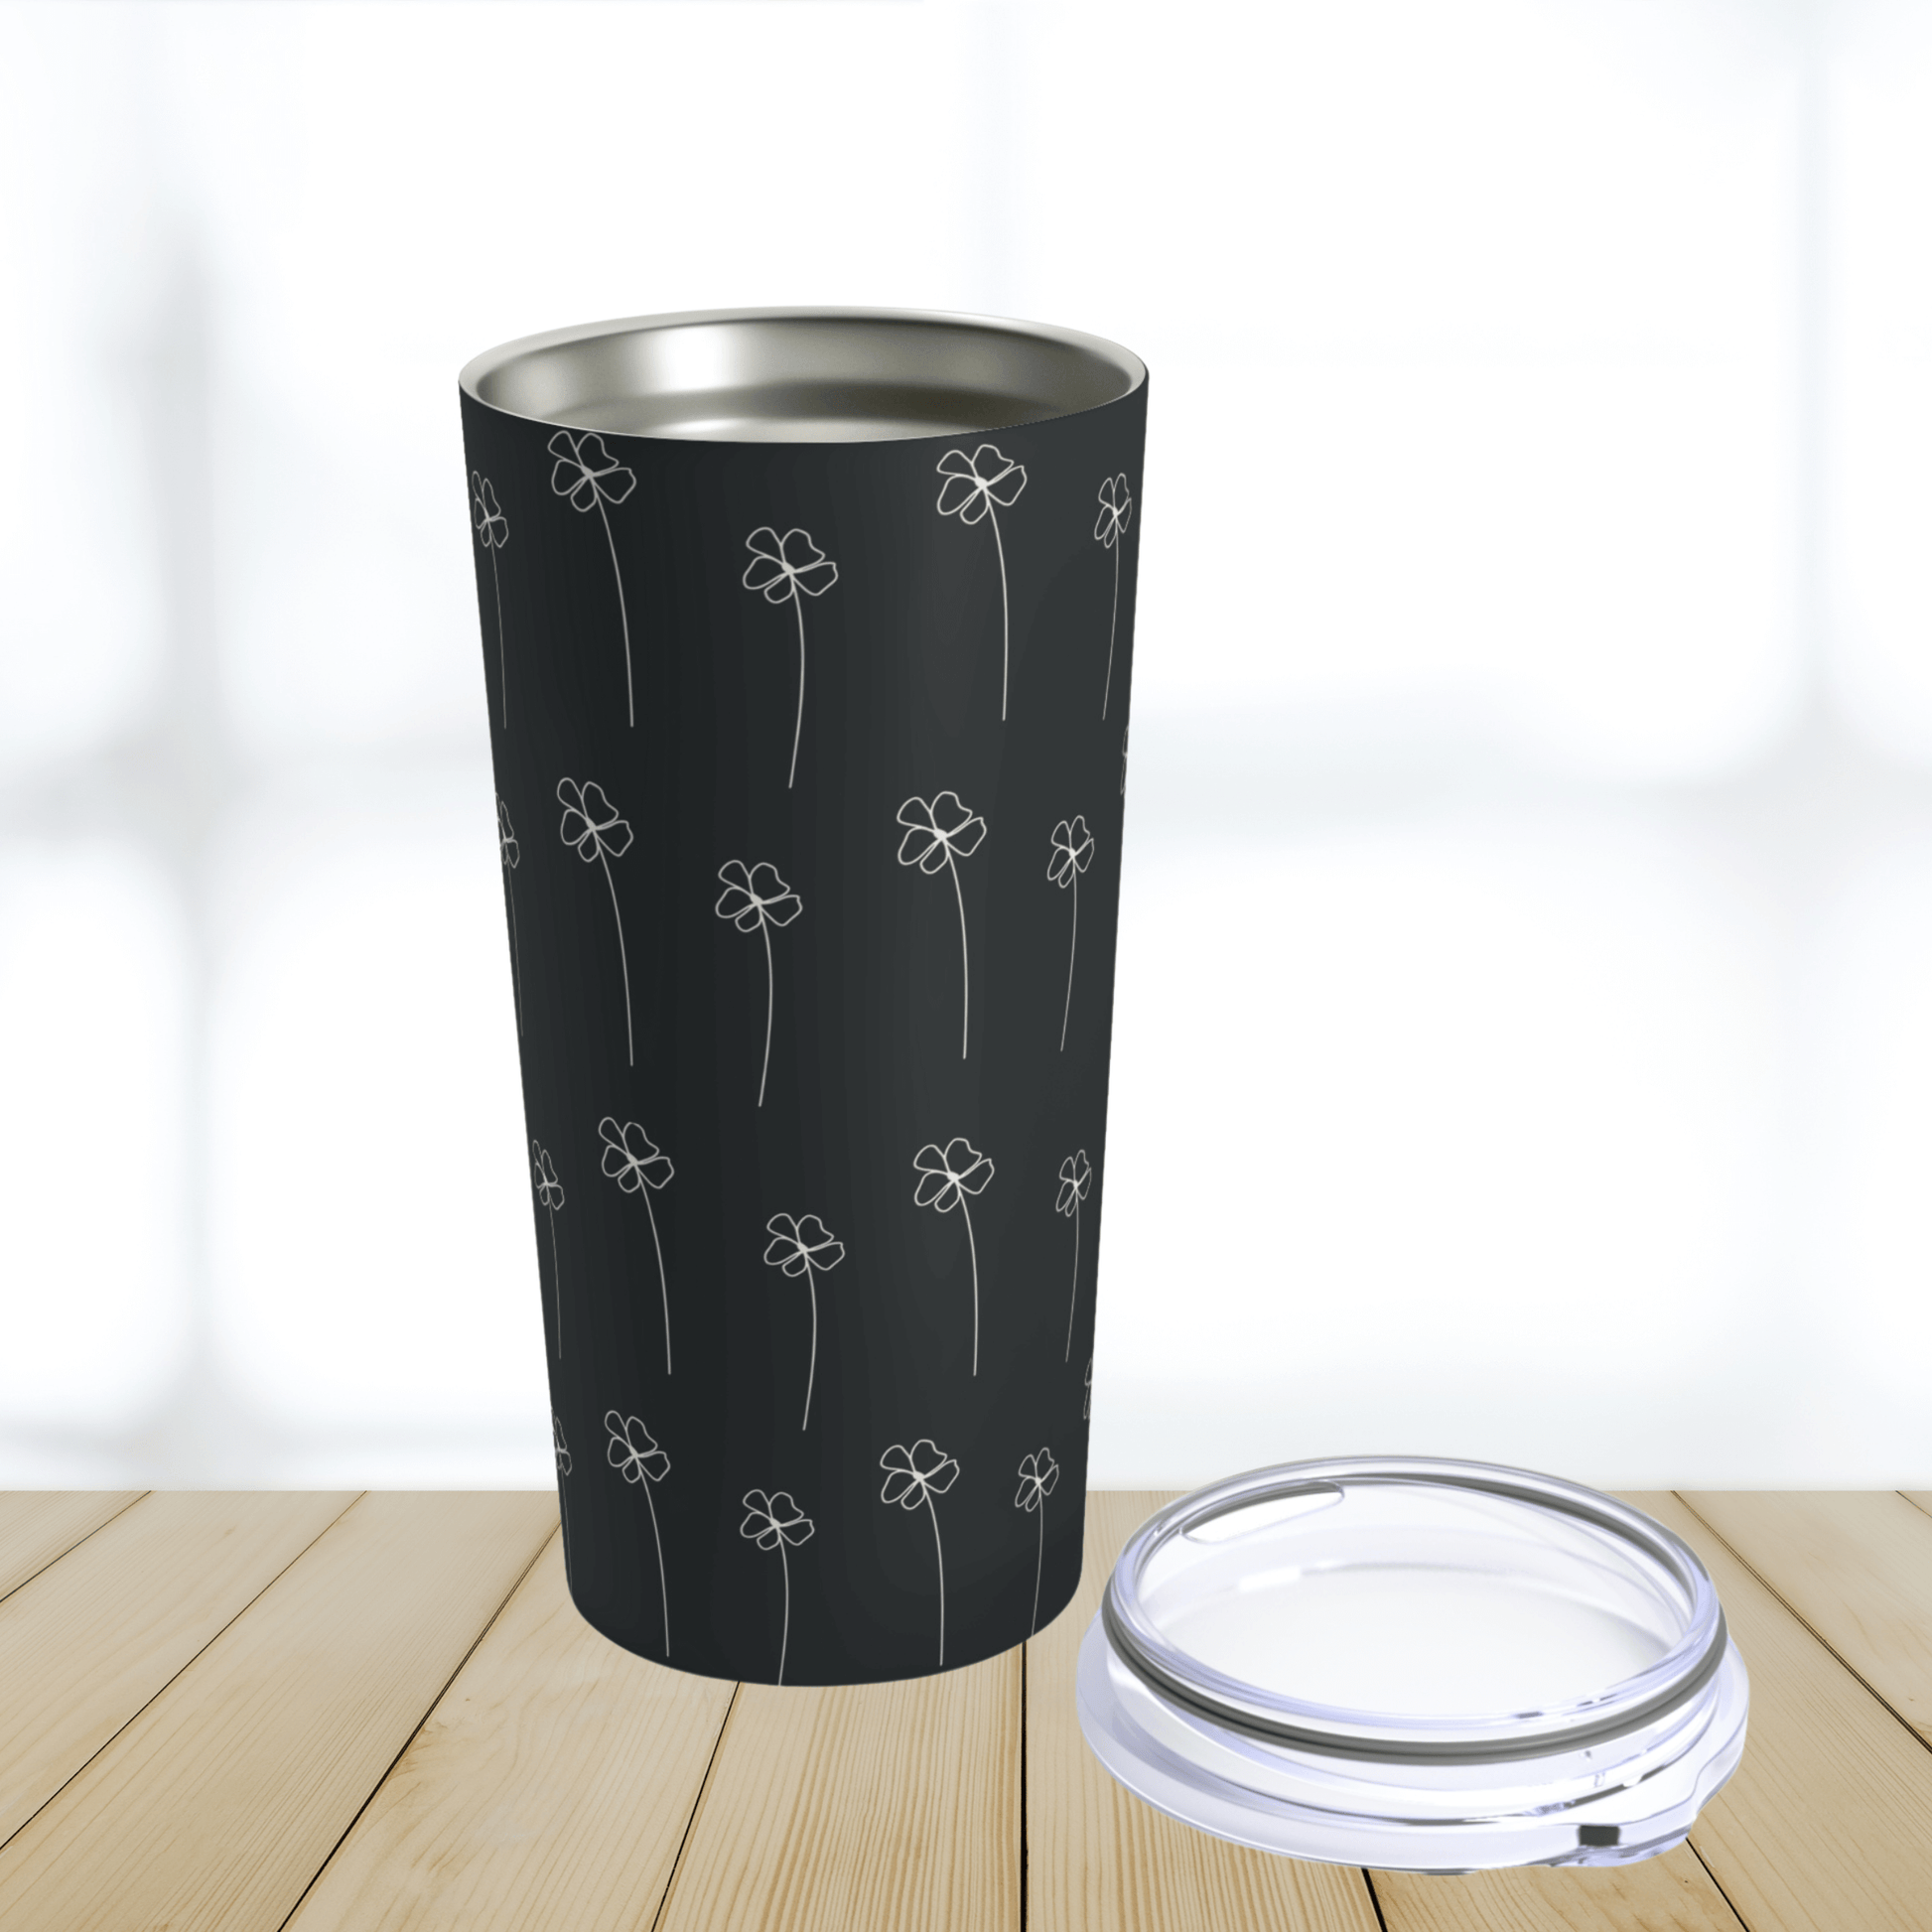 This tumbler is the perfect to go coffee mug and is shown with the lid off next to it.